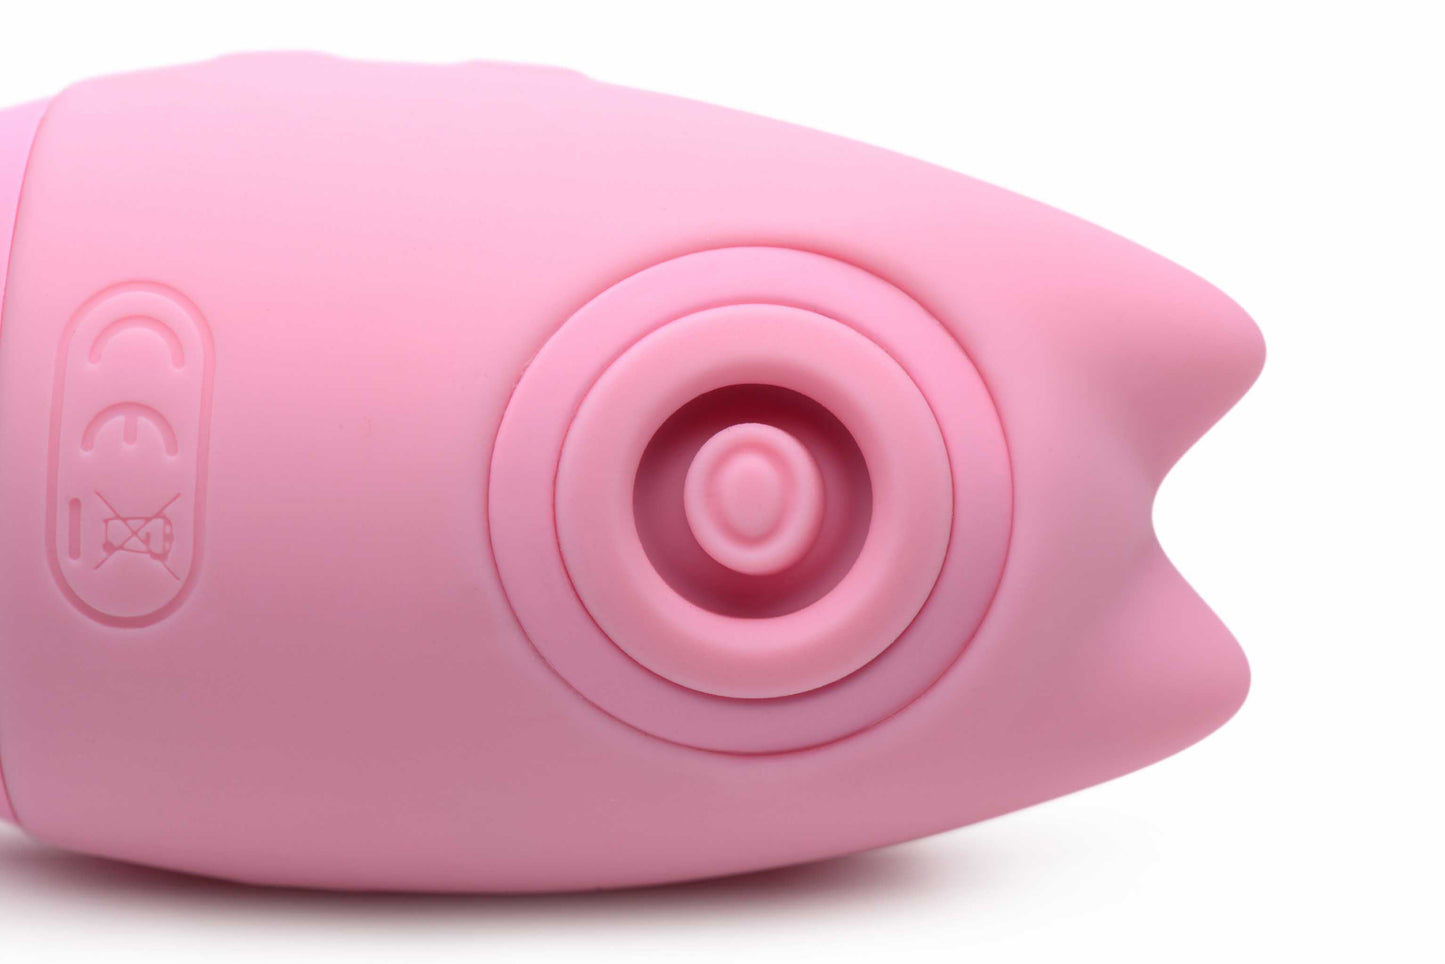 front view of the inmi shegasm kitty licker 5x silicone rechargeable clit stimulator pink xr-ag628